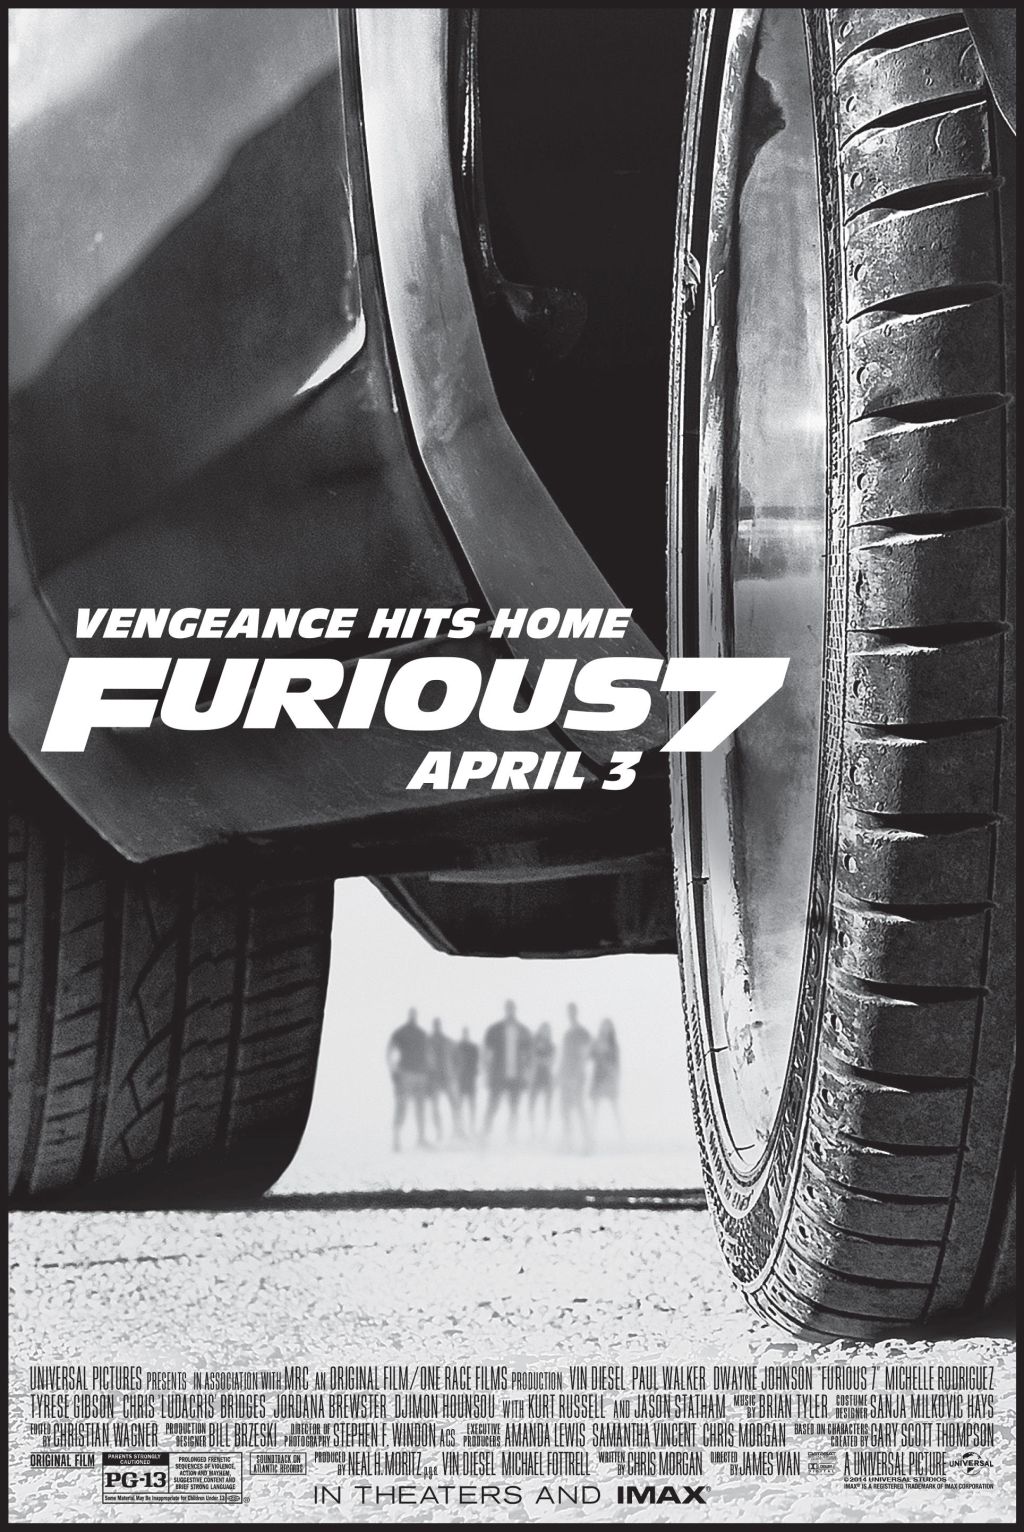 Register to win Fast and Furious 7 Passes